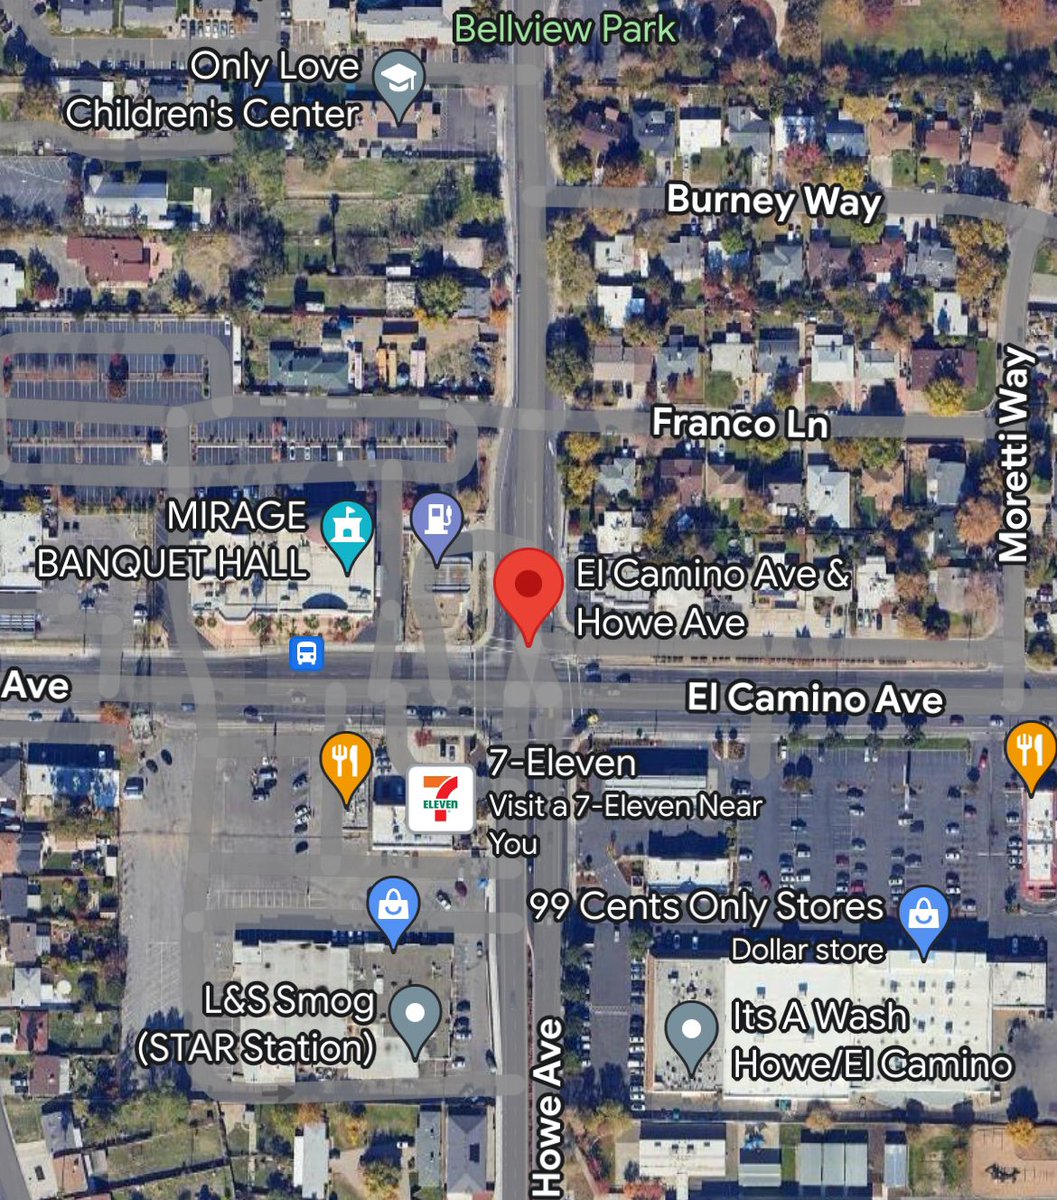 Shooting at Howe Avenue and El Camino Avenue. Victims are two adult females, both self-transported to the hospital. If you have information about this incident, please call the Sheriff’s Office at 916-874-5115.